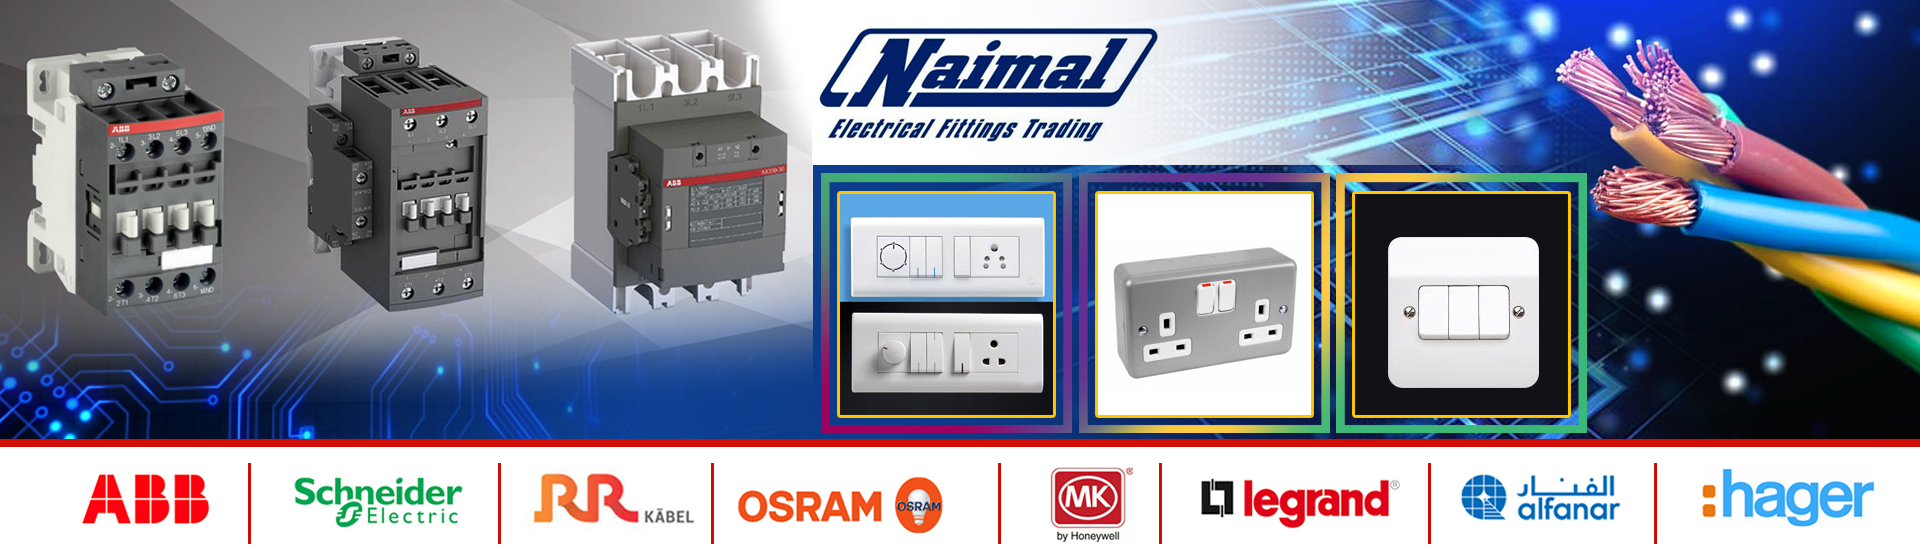 NAIMAL ELECTRICAL FITTINGS TRADING CO LLC